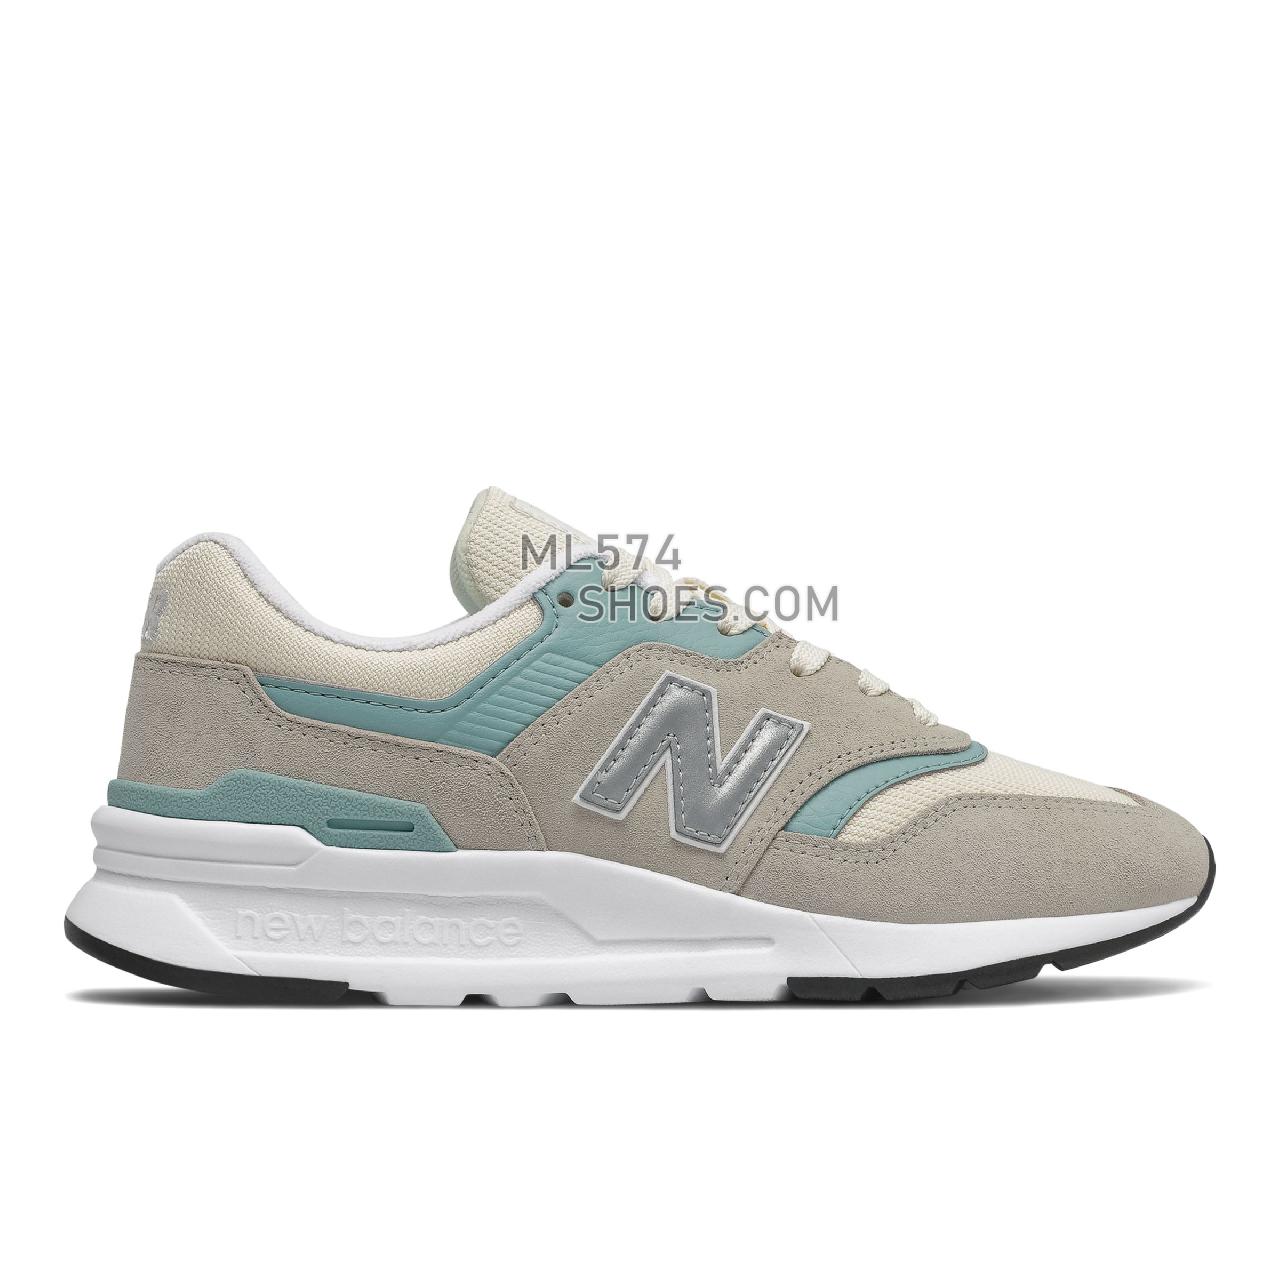 New Balance 997H - Women's Classic Sneakers - Tan with White - CW997HTL